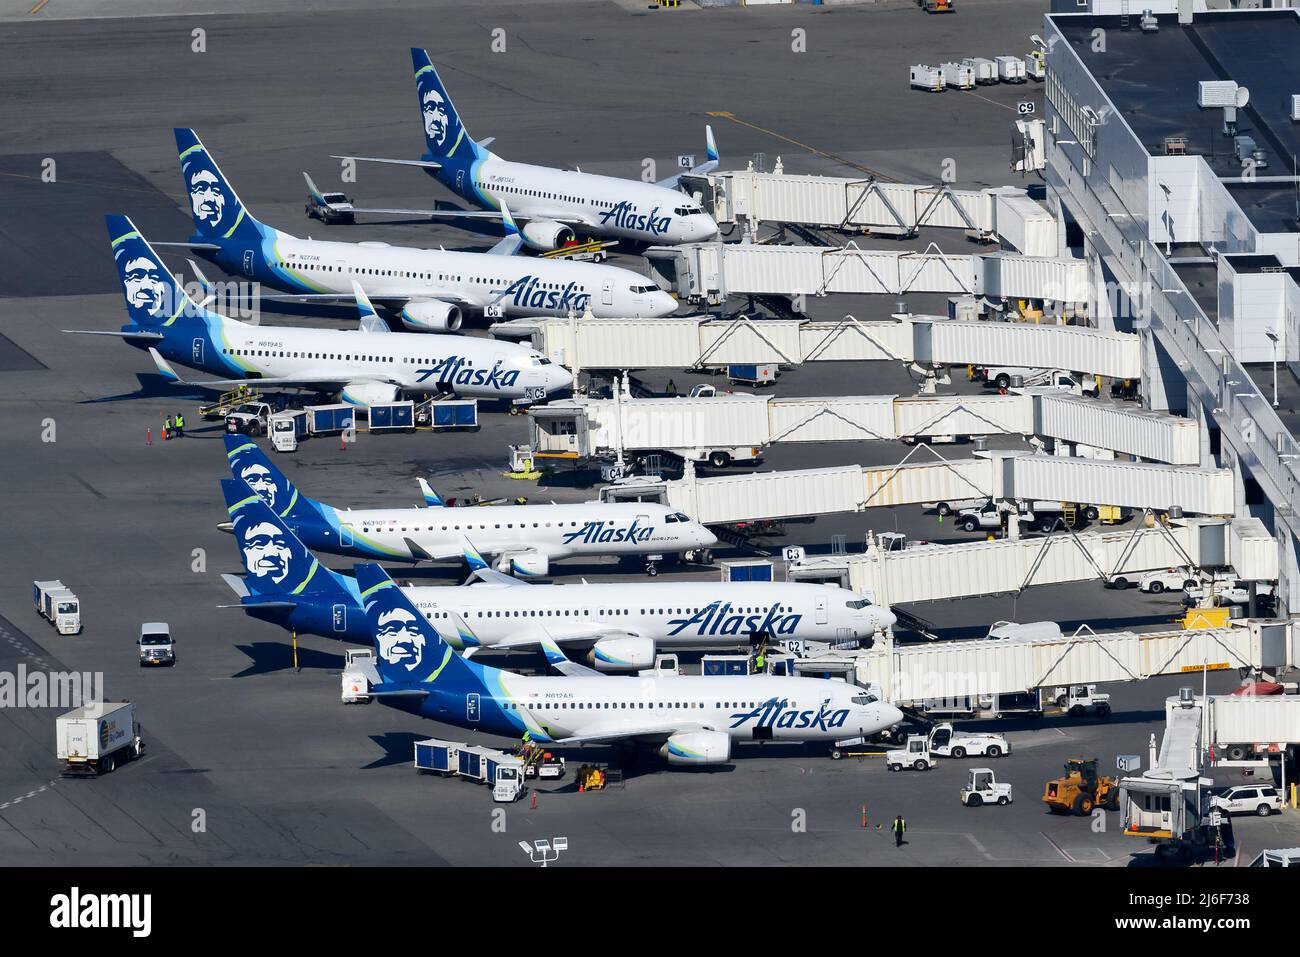 Alaska Airlines terminal at the airline hub at Ted Stevens Anchorage Airport in Alaska. Multiple aircraft of Alaska Airlines together. Planes lineup. Stock Photo